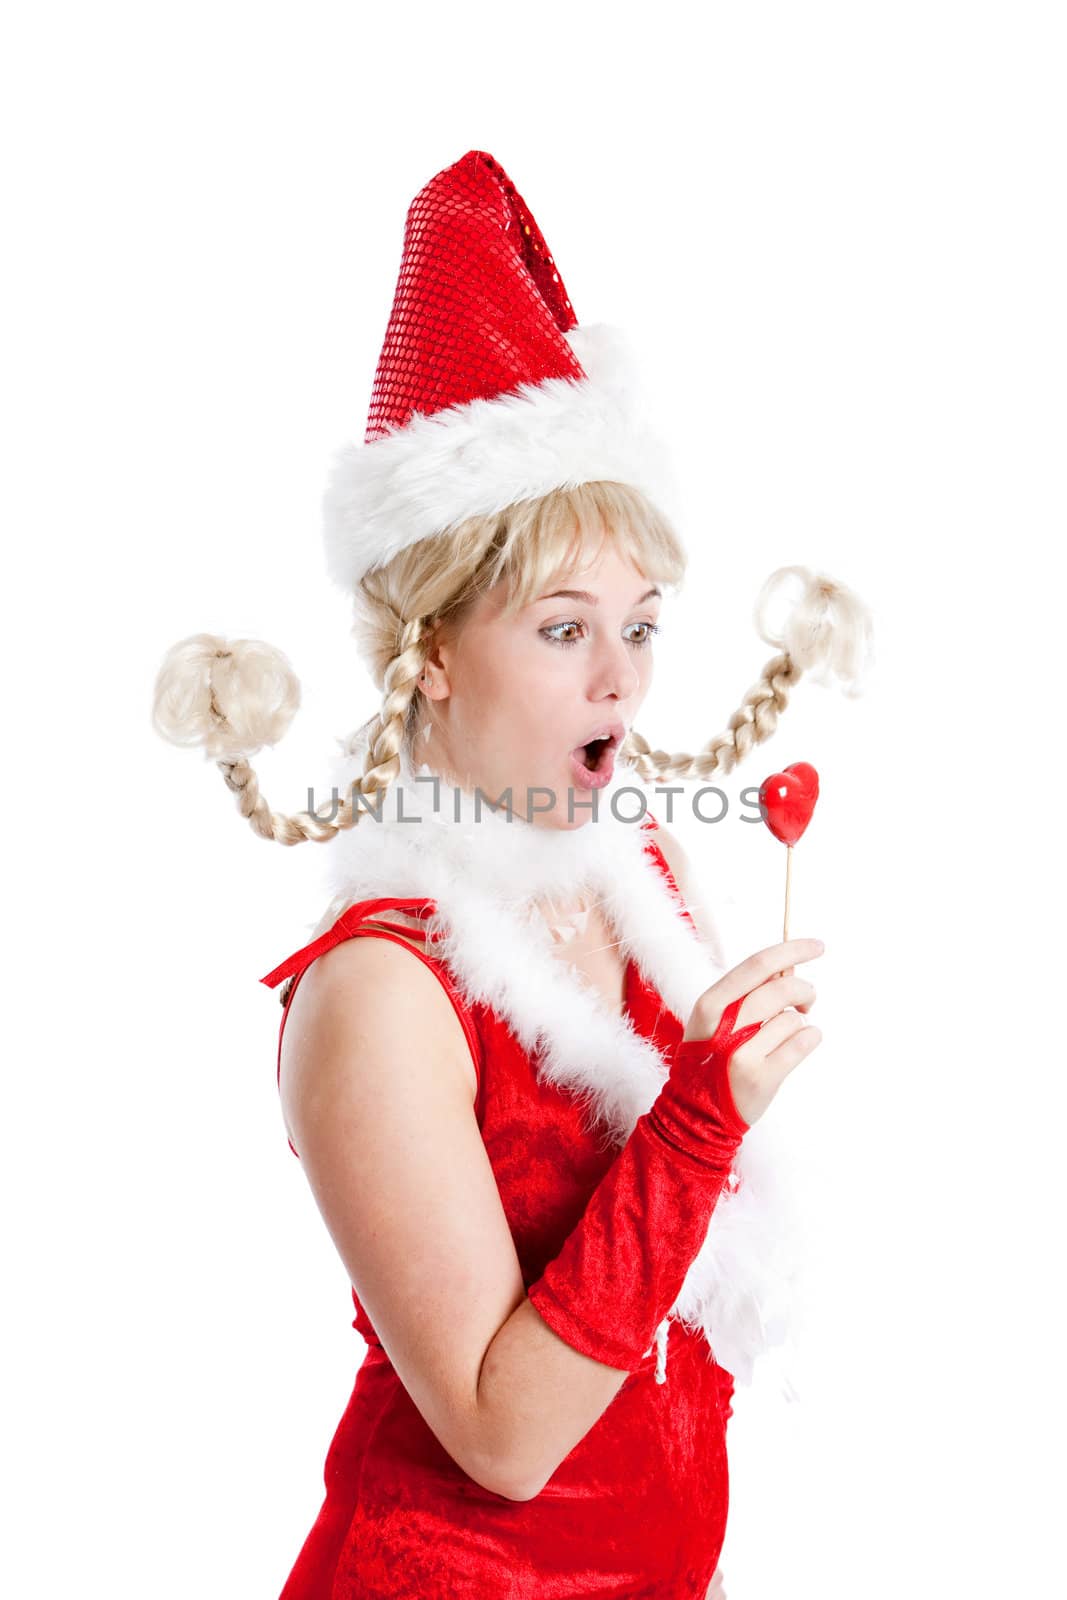 Cute young girl in santa outfit looking shocked at her lollipop